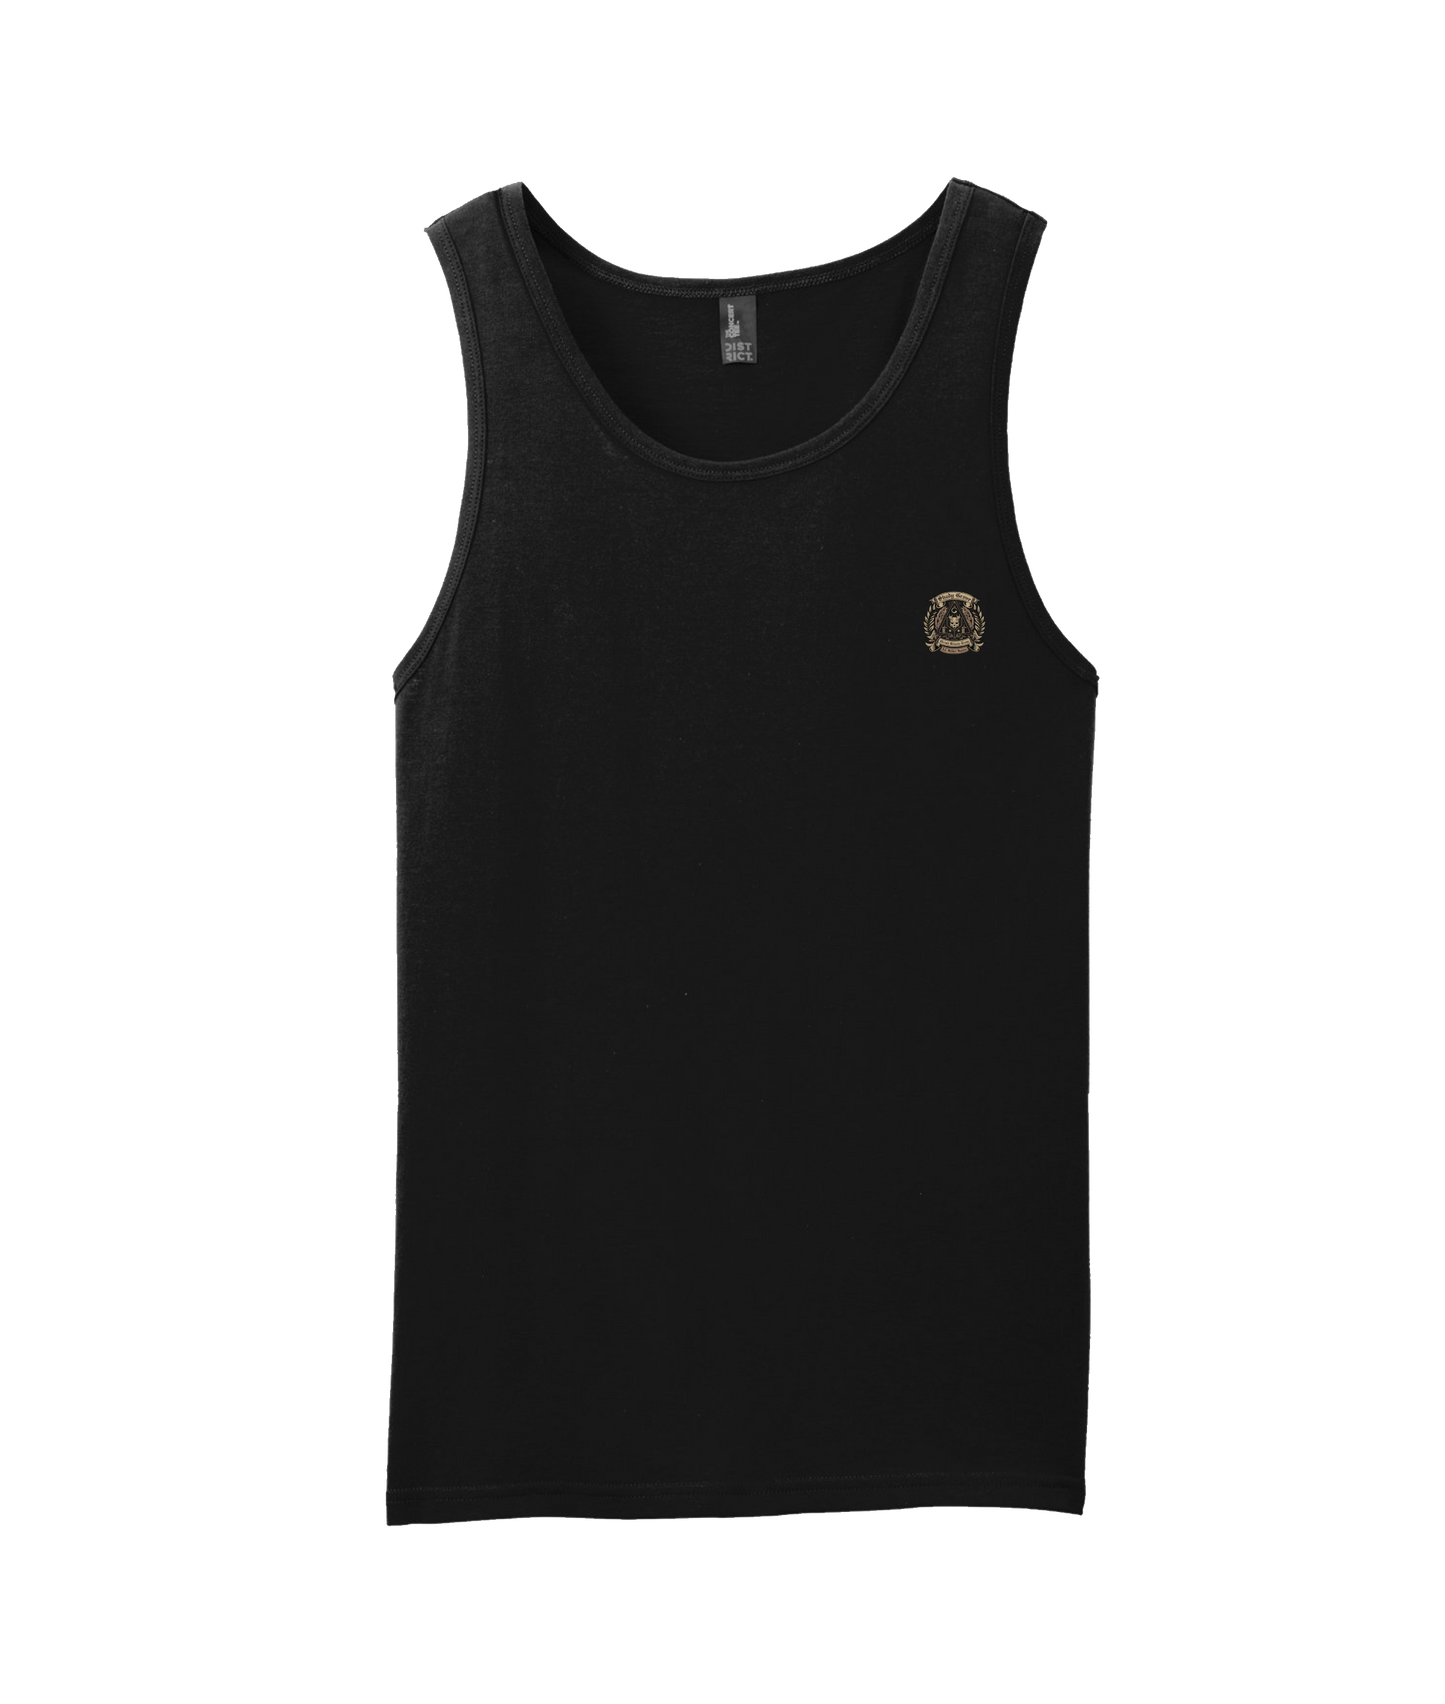 All Father Games - SHADY GROVE - Black Tank Top